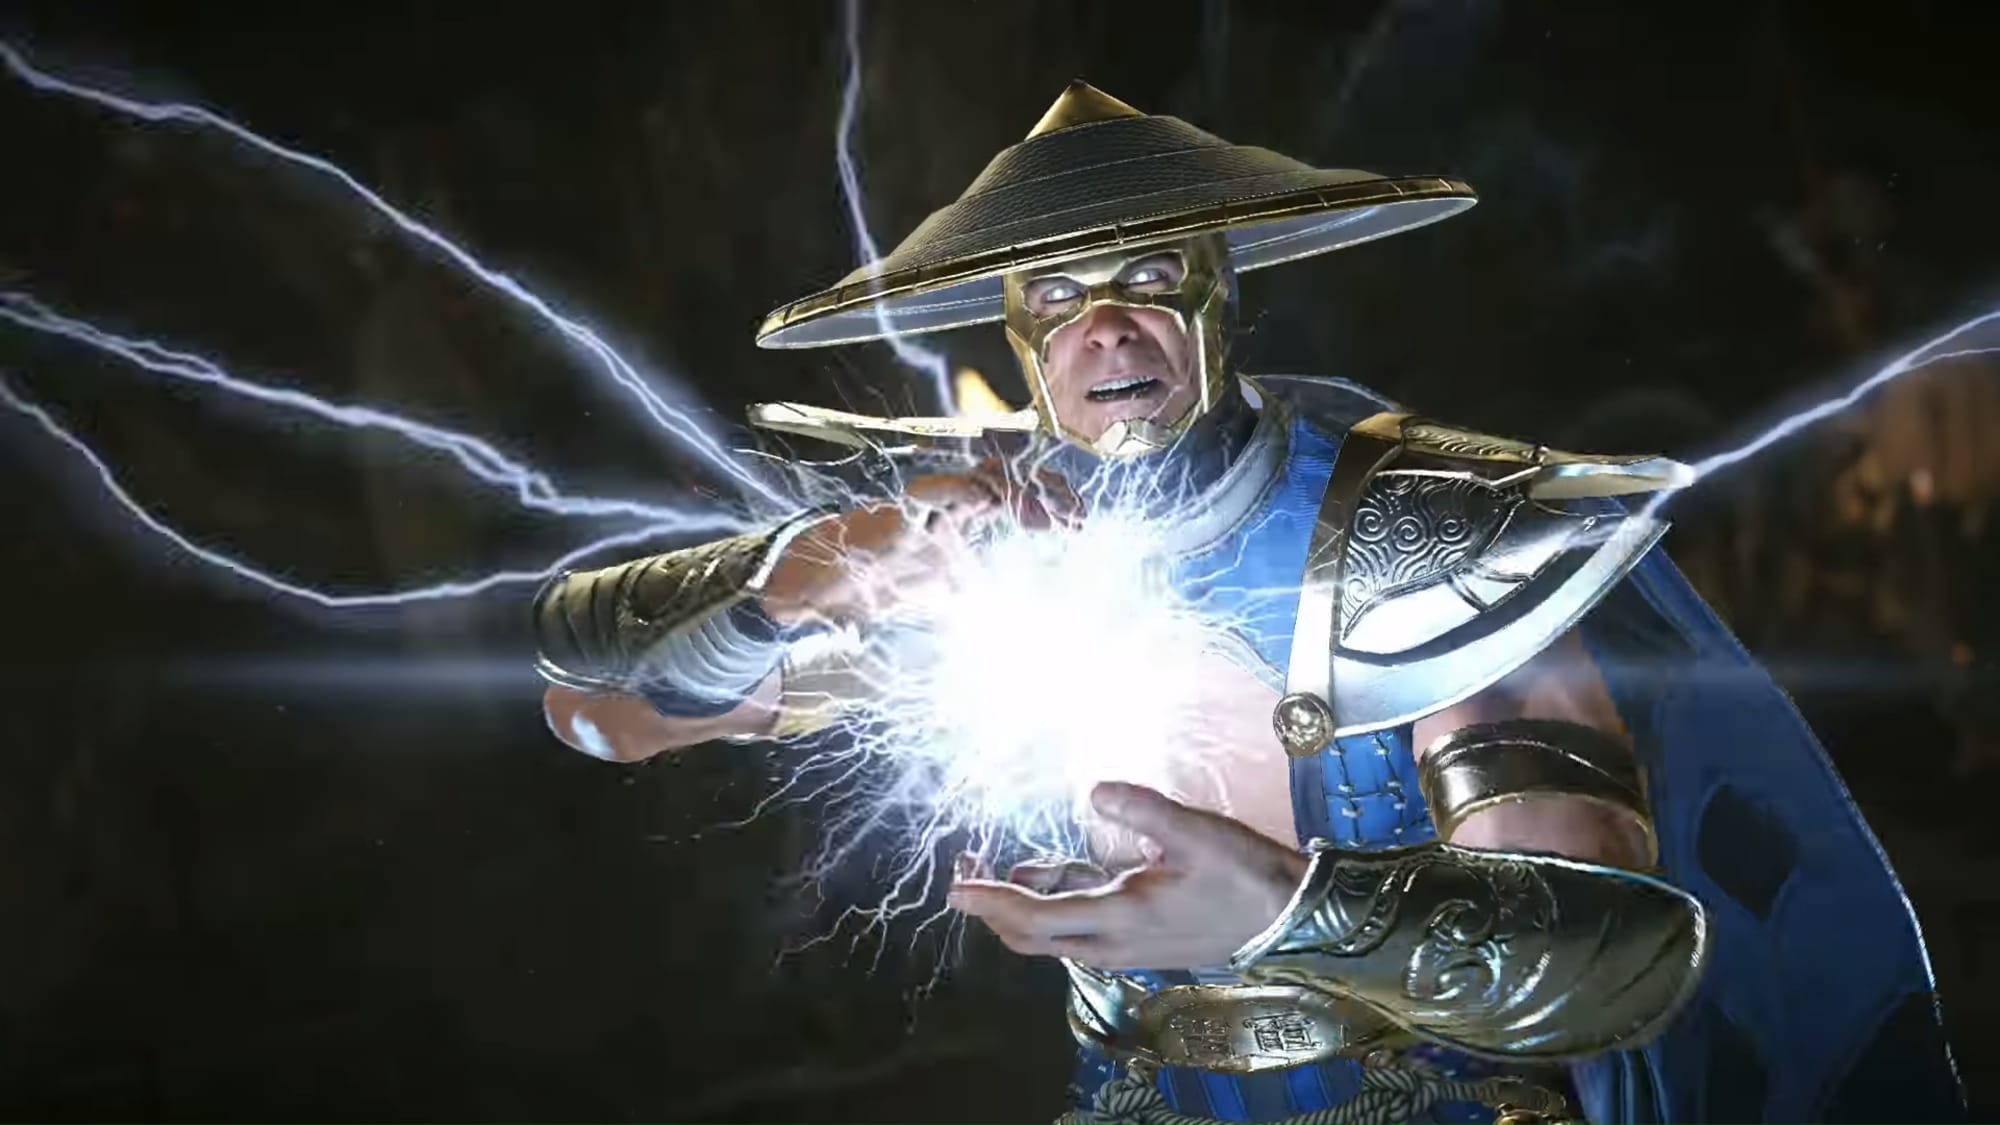 Injustice 2 Announces Raiden From Mortal Kombat As Its Next DLC Character -  Siliconera